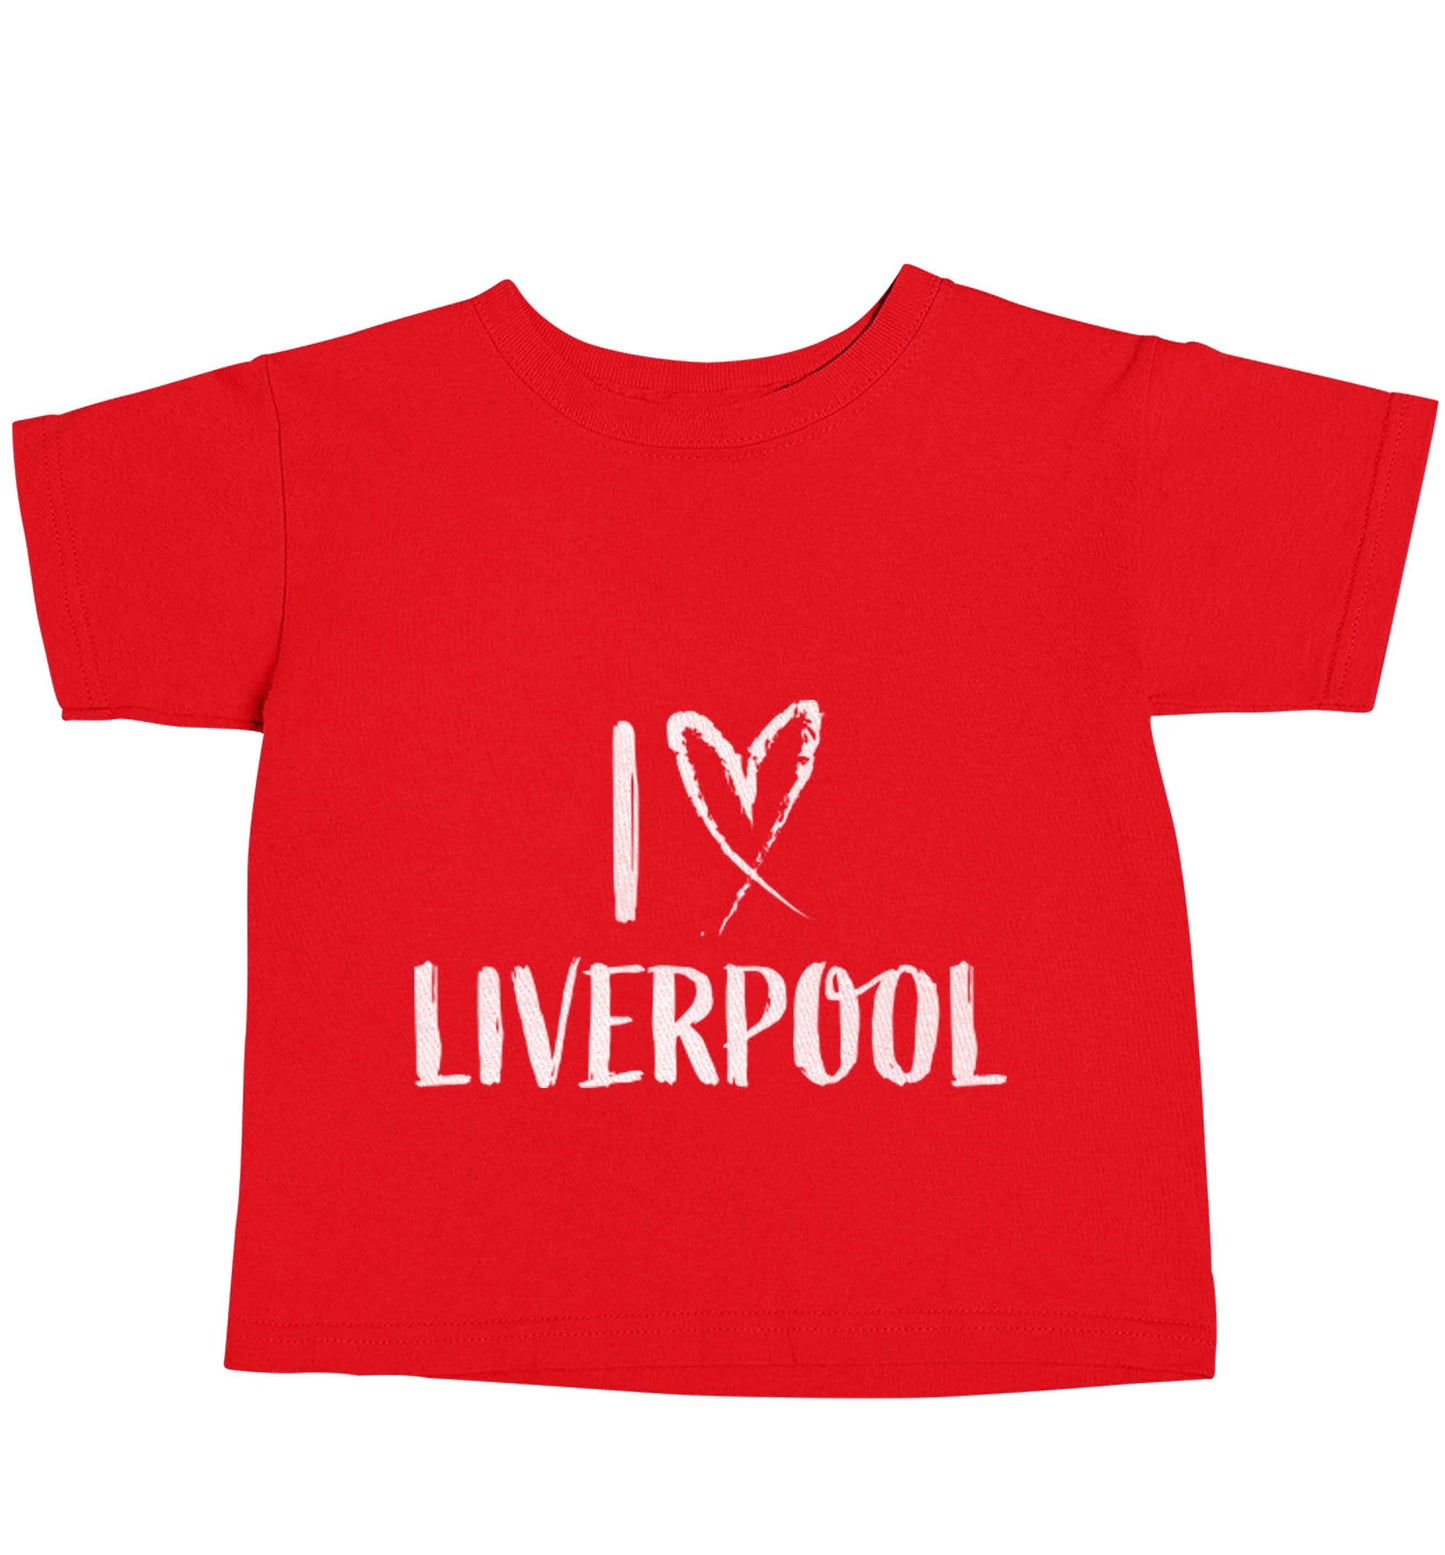 I love Liverpool red baby toddler Tshirt 2 Years